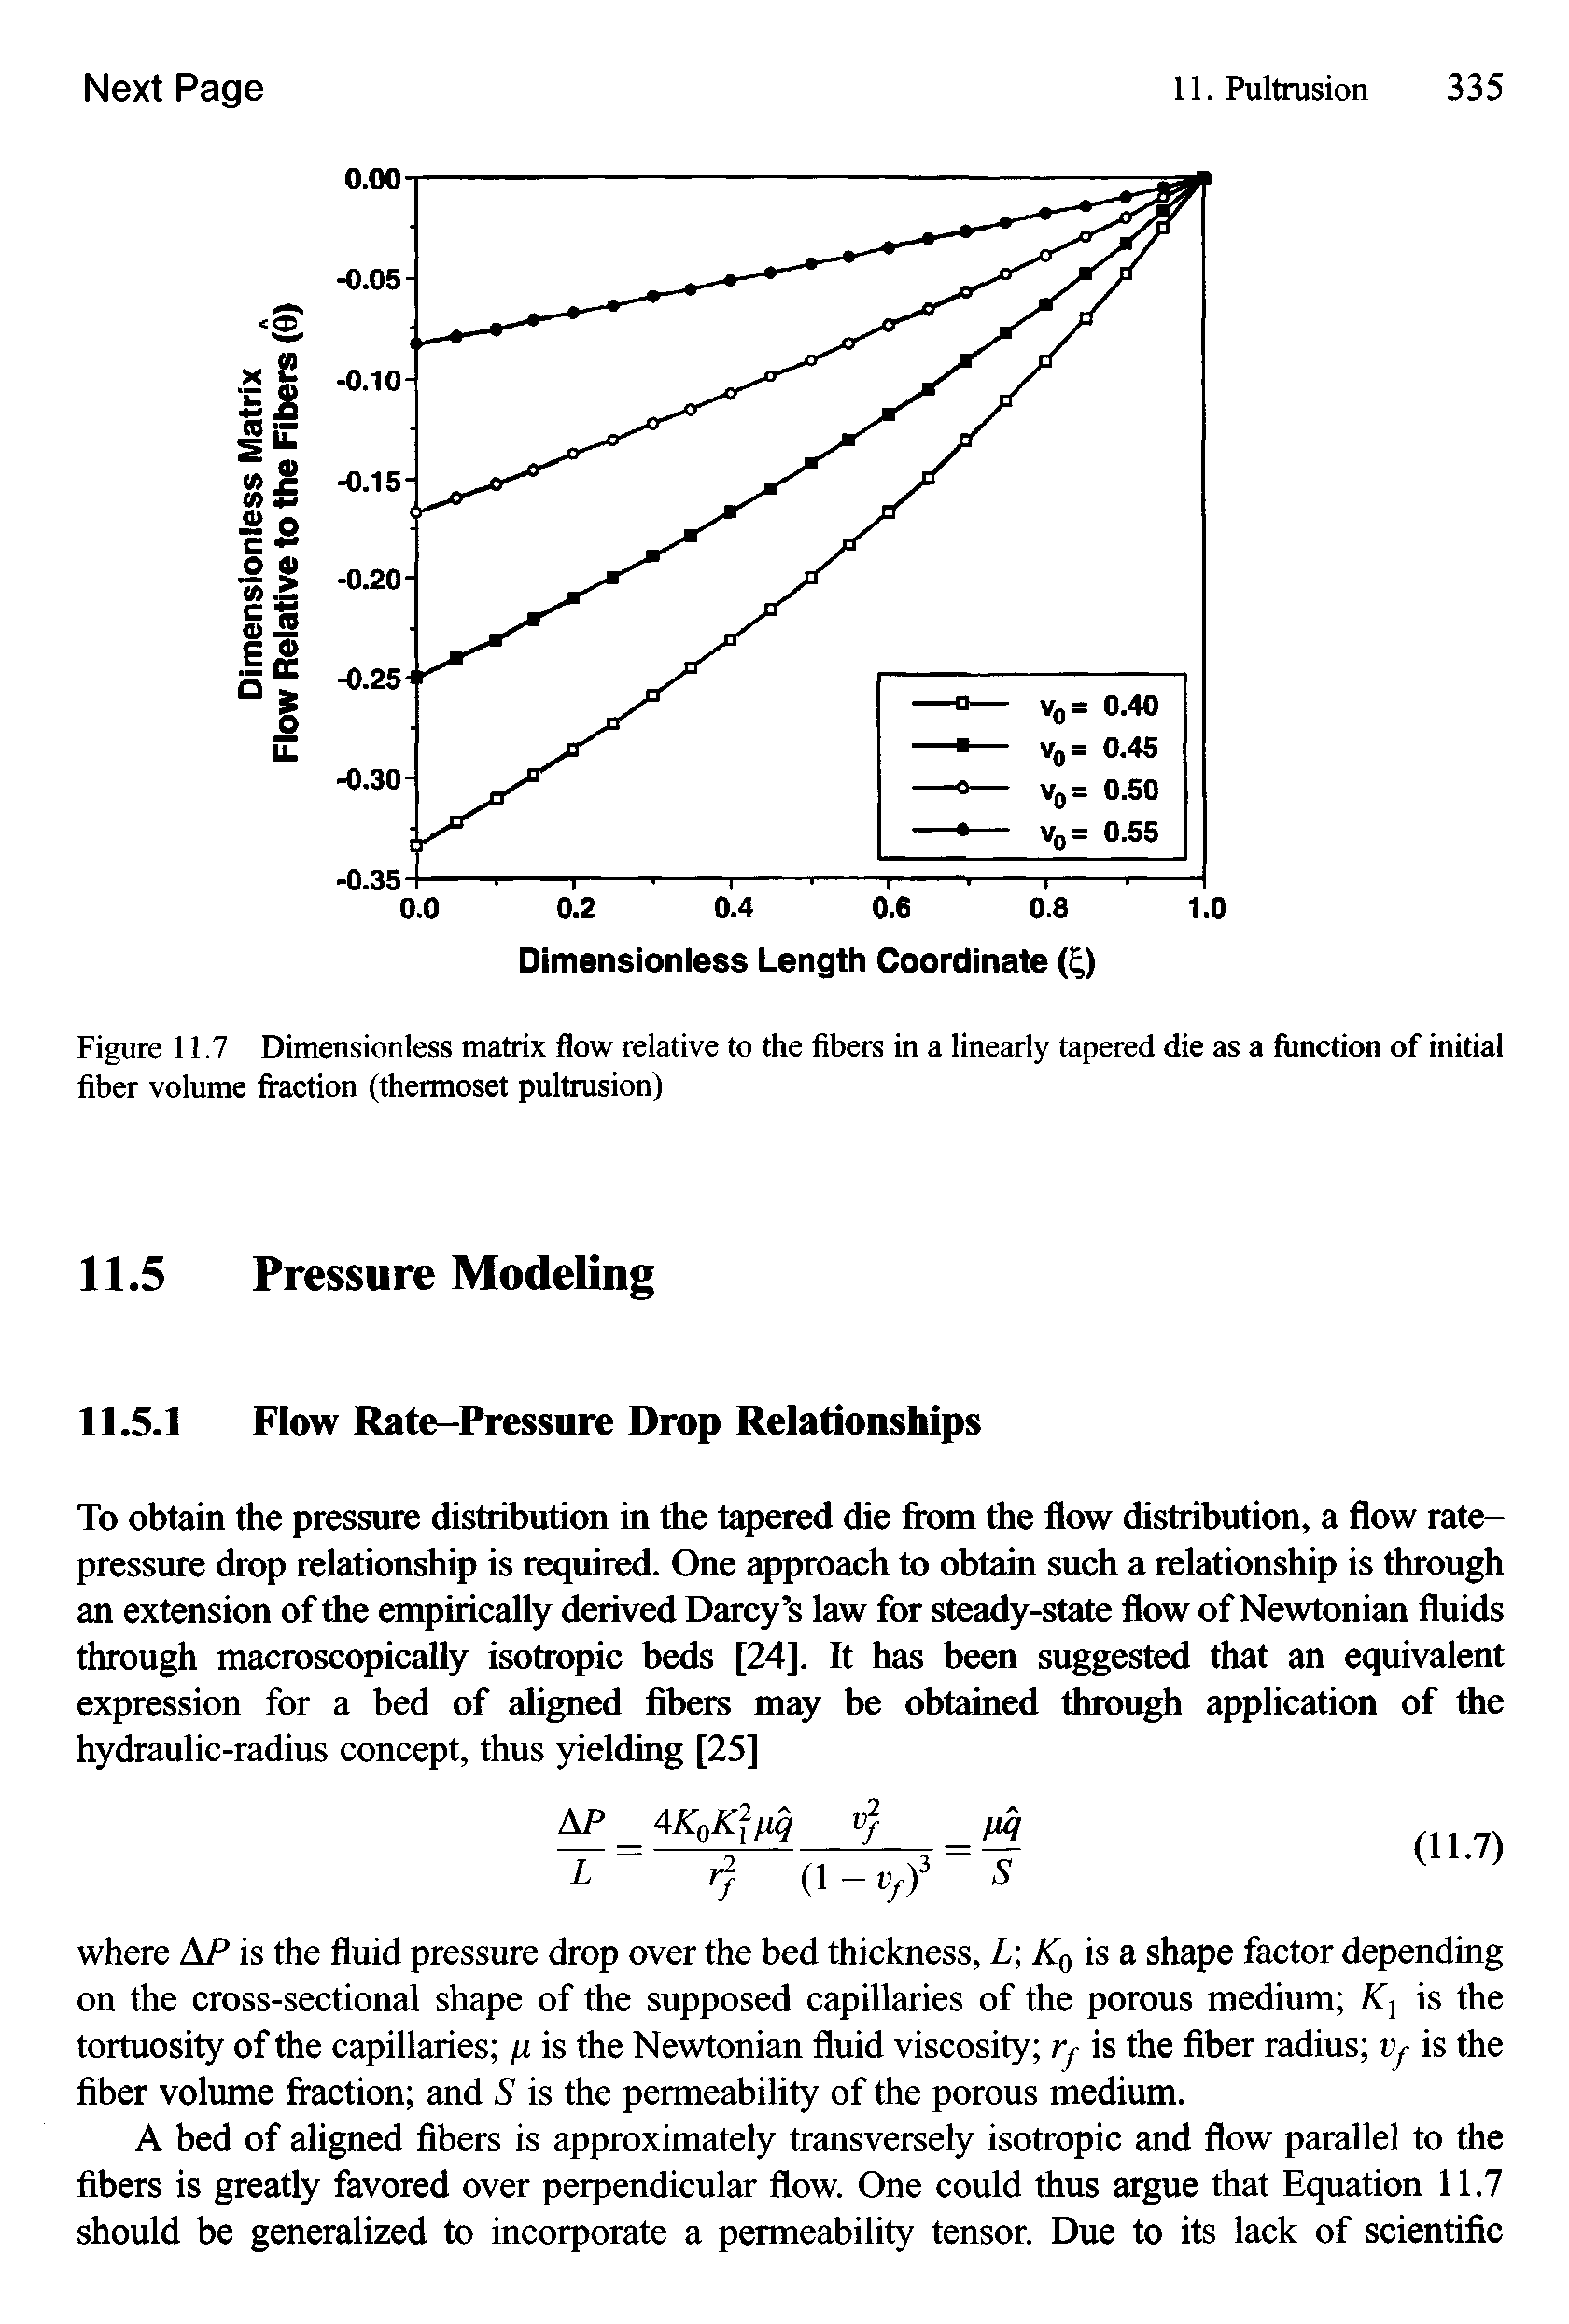 Figure 11.7 Dimensionless matrix flow relative to the fibers in a linearly tapered die as a function of initial fiber volume fraction (thermoset pultrusion)...